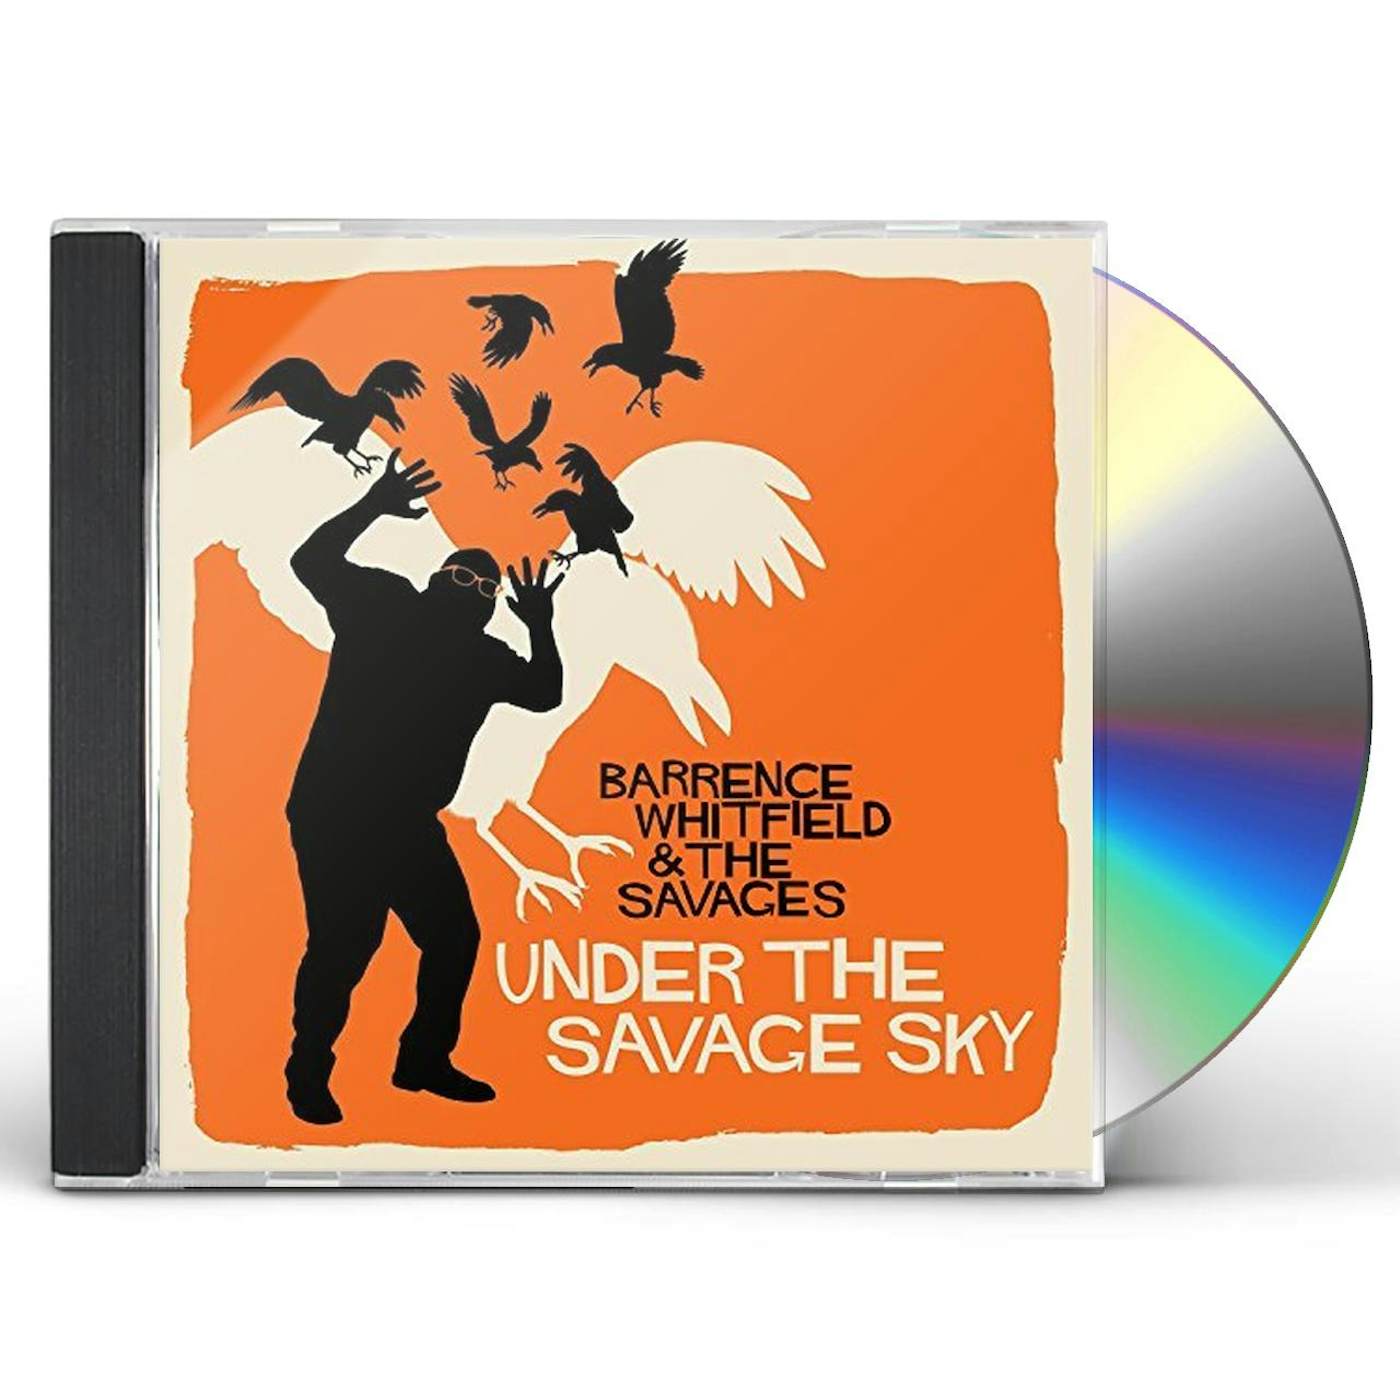 Barrence Whitfield & The Savages UNDER THE SAVAGE SKY CD